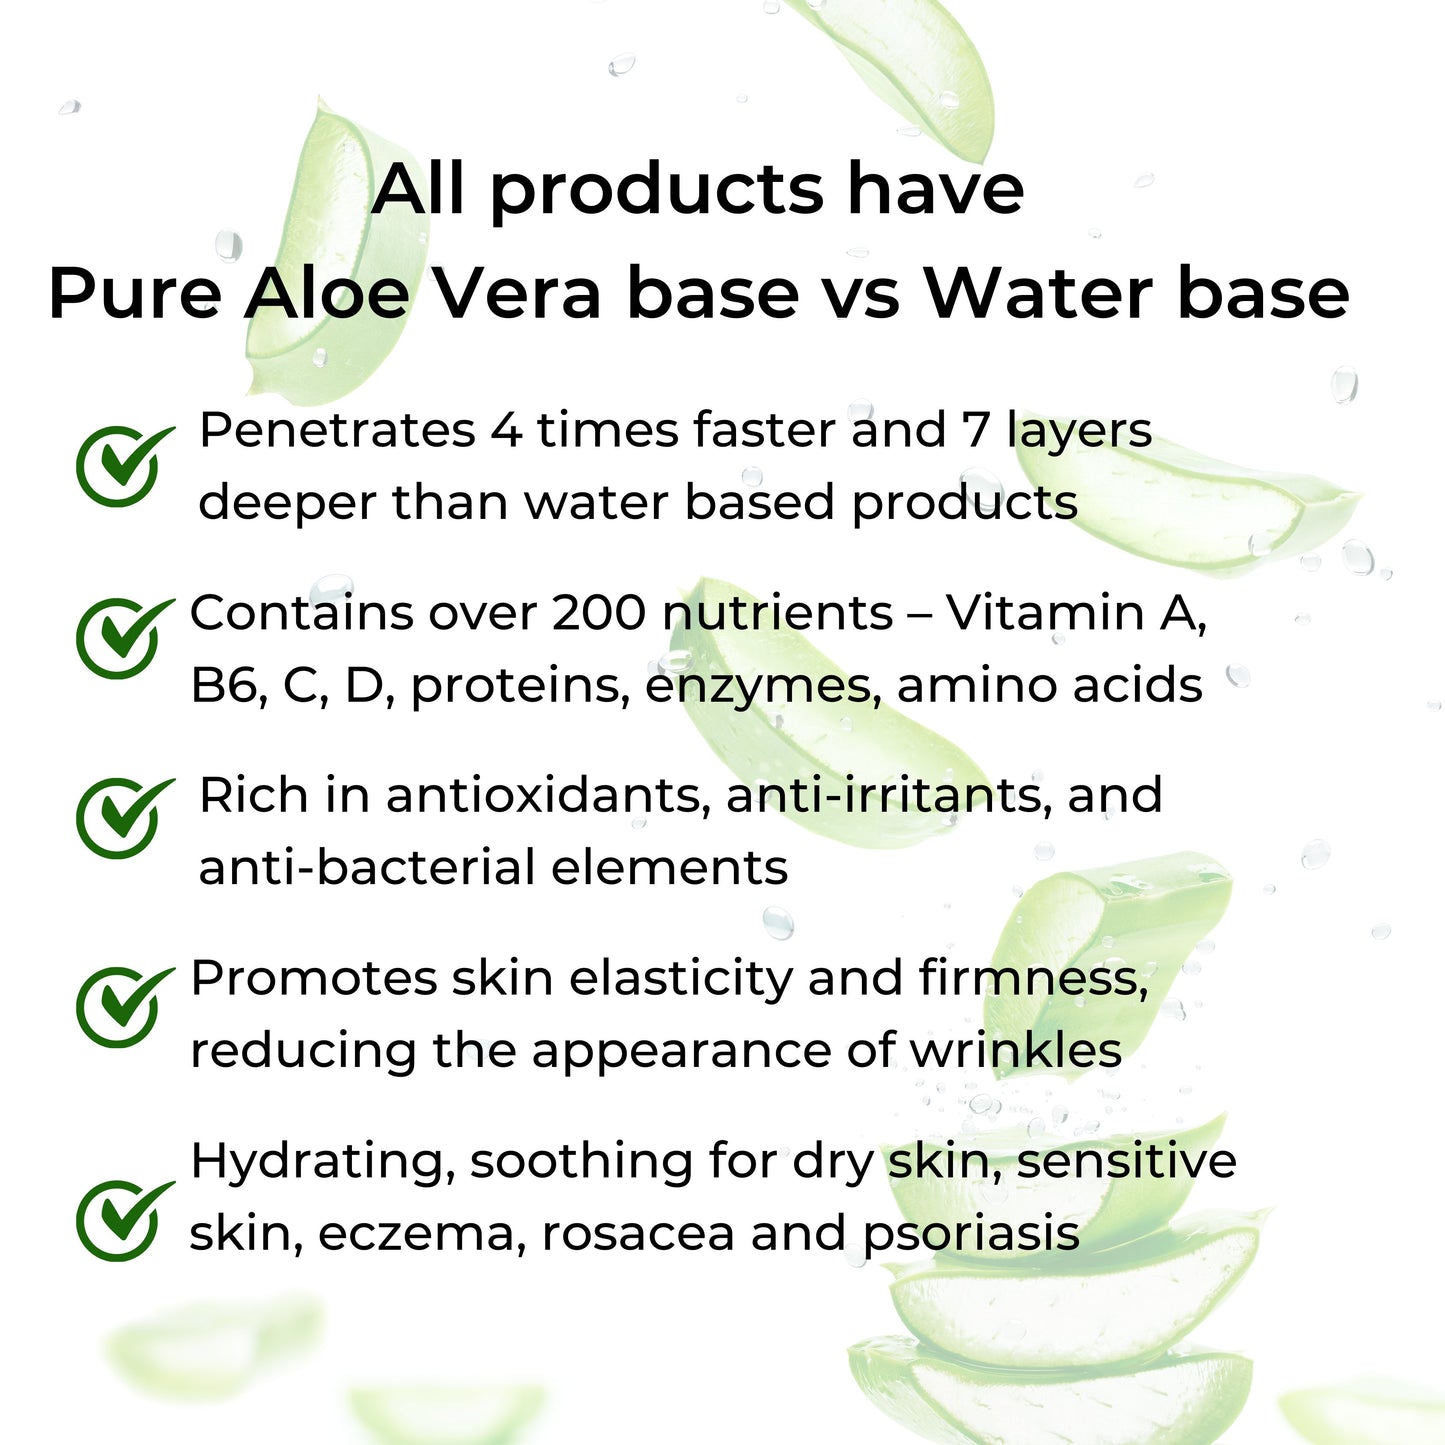 All have a base of pure aloe vera instead of water. This provides better skin penetration, many important nutrients, and other benefits to the skin.